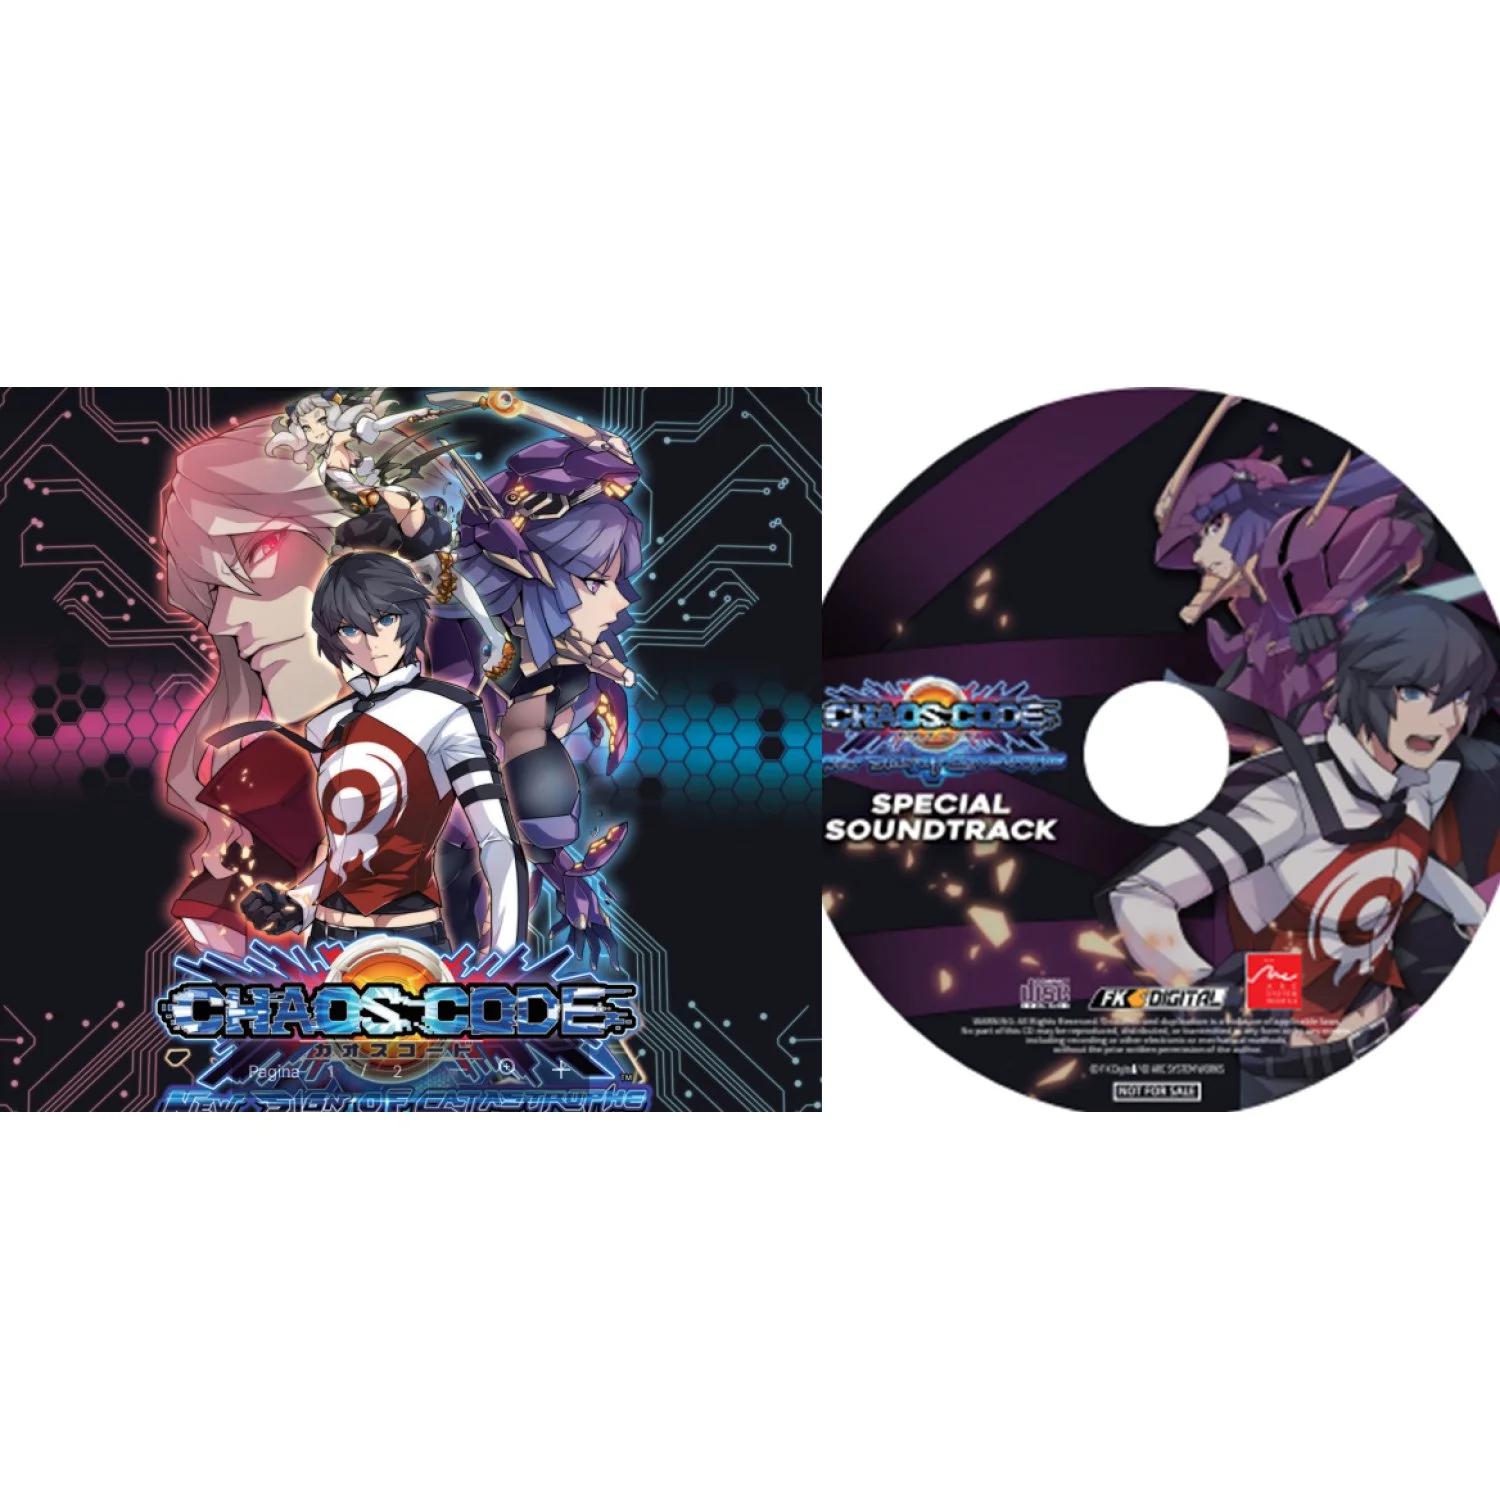 Chaos Code: New Sign of Catastrophe [Limited Edition] Precios Asian ...